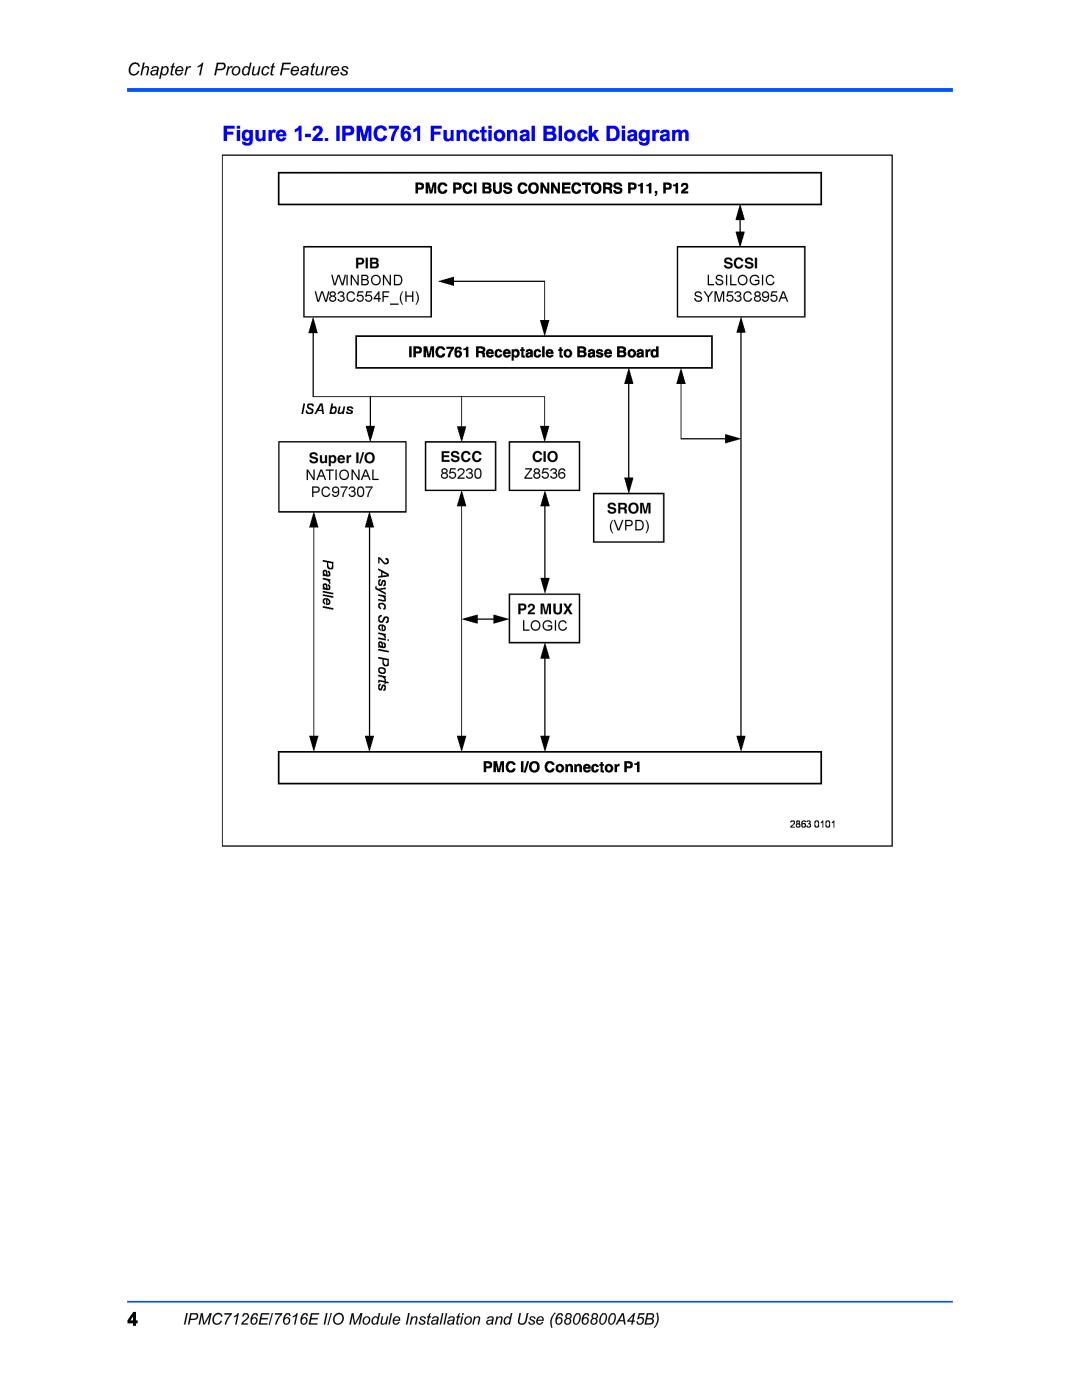 Emerson IPMC7616E, IPMC7126E manual 2. IPMC761 Functional Block Diagram, Product Features, ISA bus, Async 